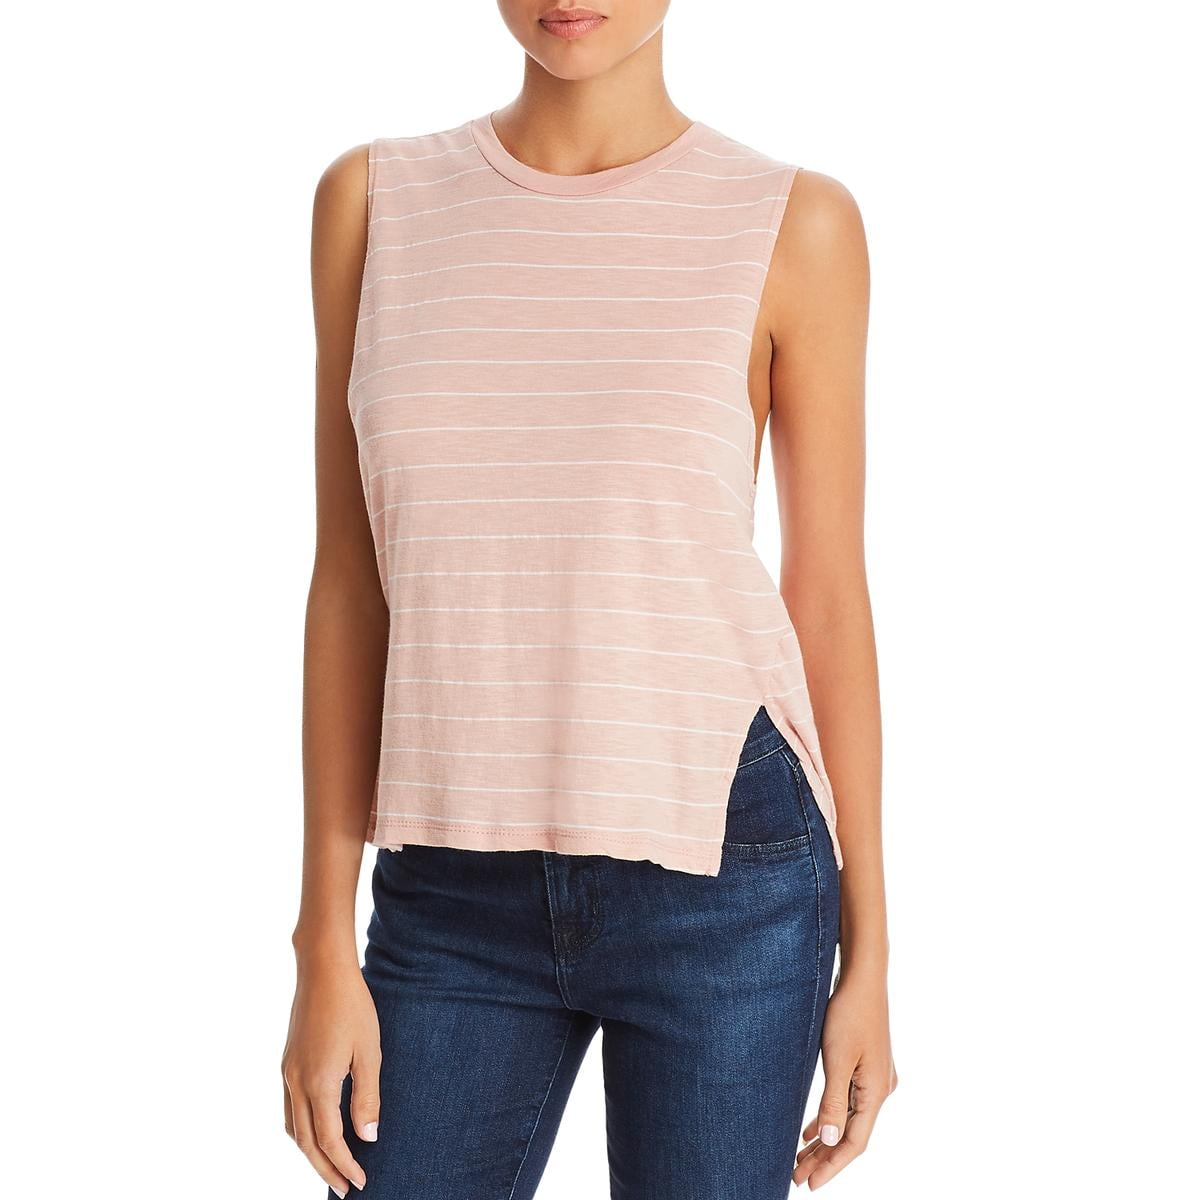 Project Social T Womens All About Me Linen Scoop Neck Tank Top Shirt BHFO 8318